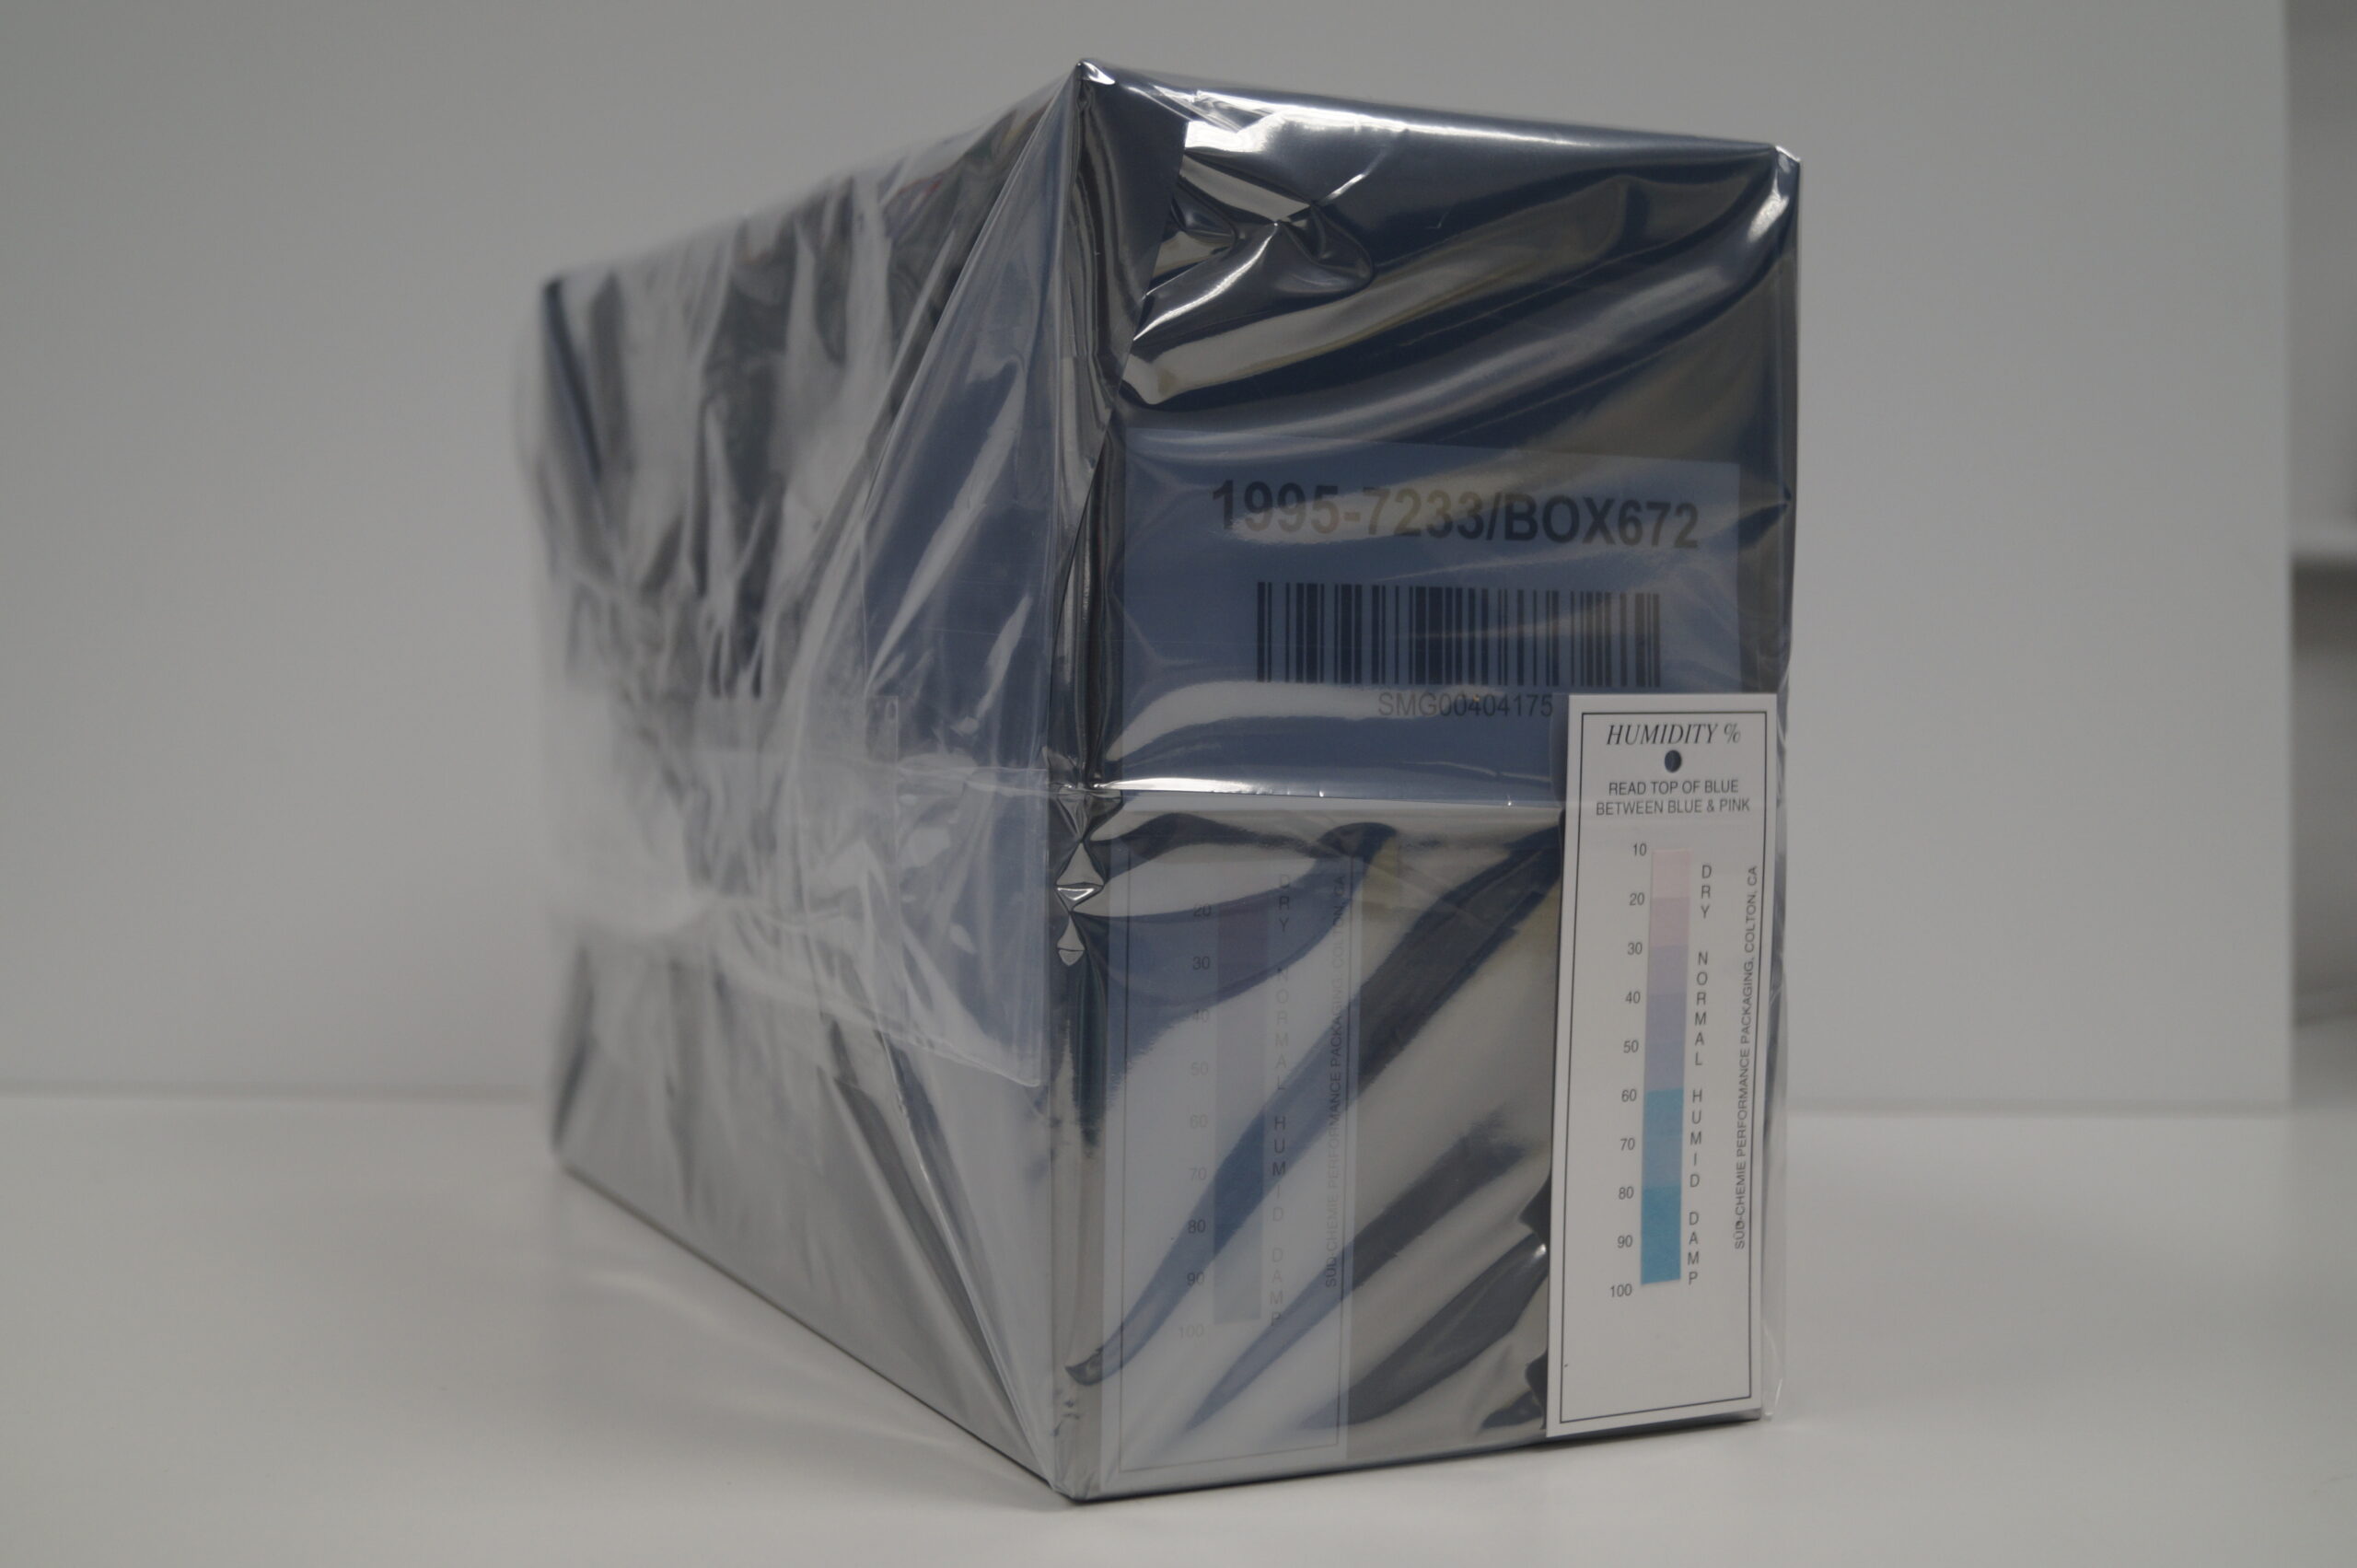 A black box wrapped in clear plastic with a white card showing a colour humidity scale